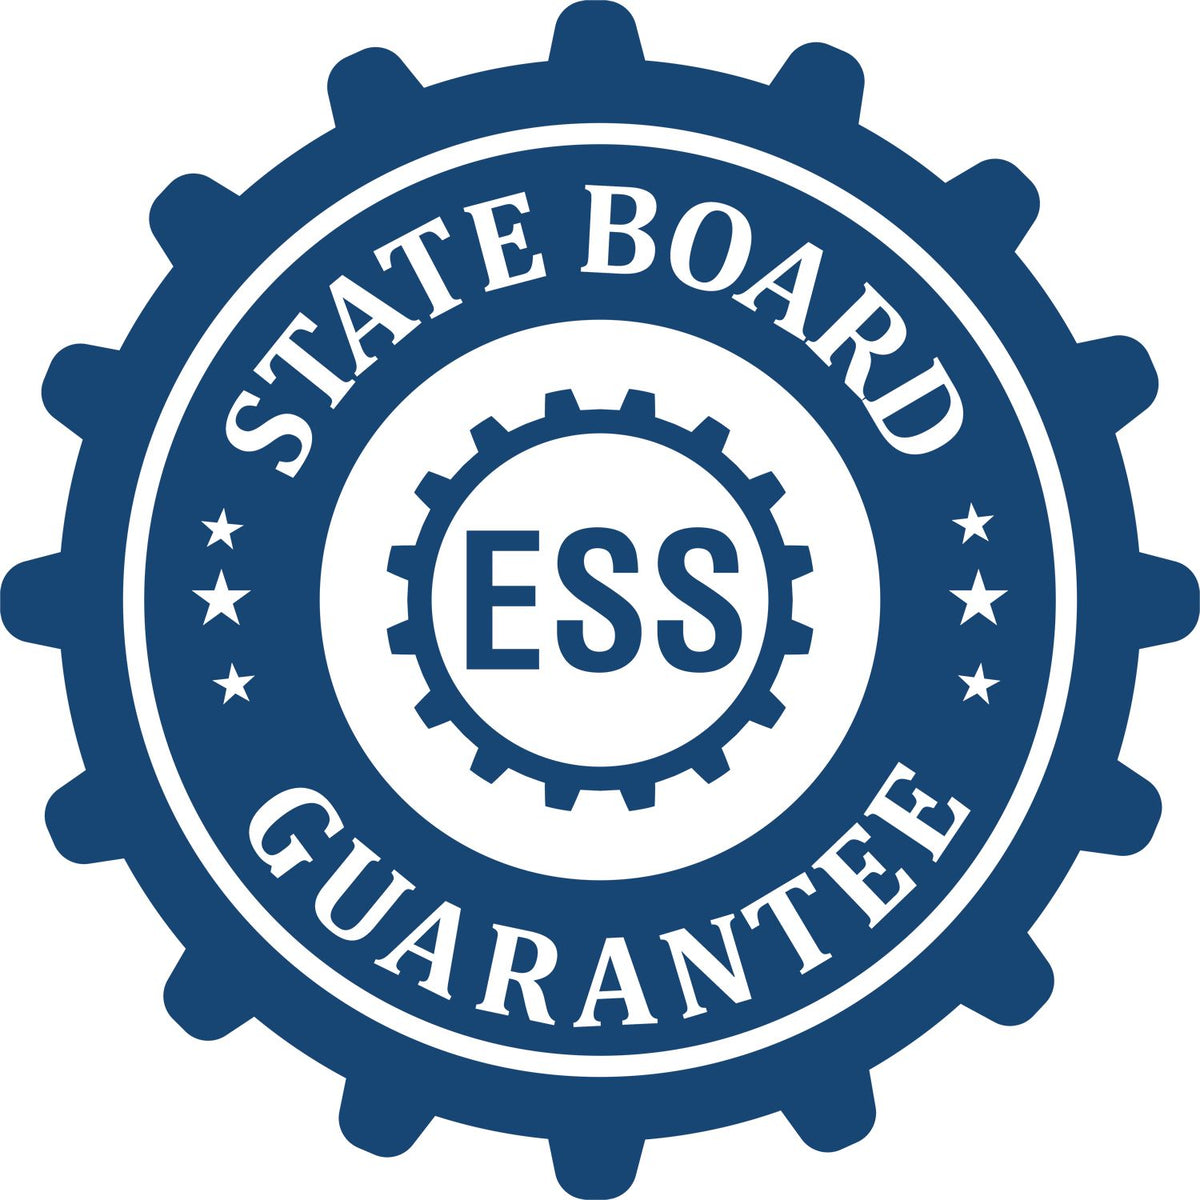 An emblem in a gear shape illustrating a state board guarantee for the Hybrid Hawaii Landscape Architect Seal